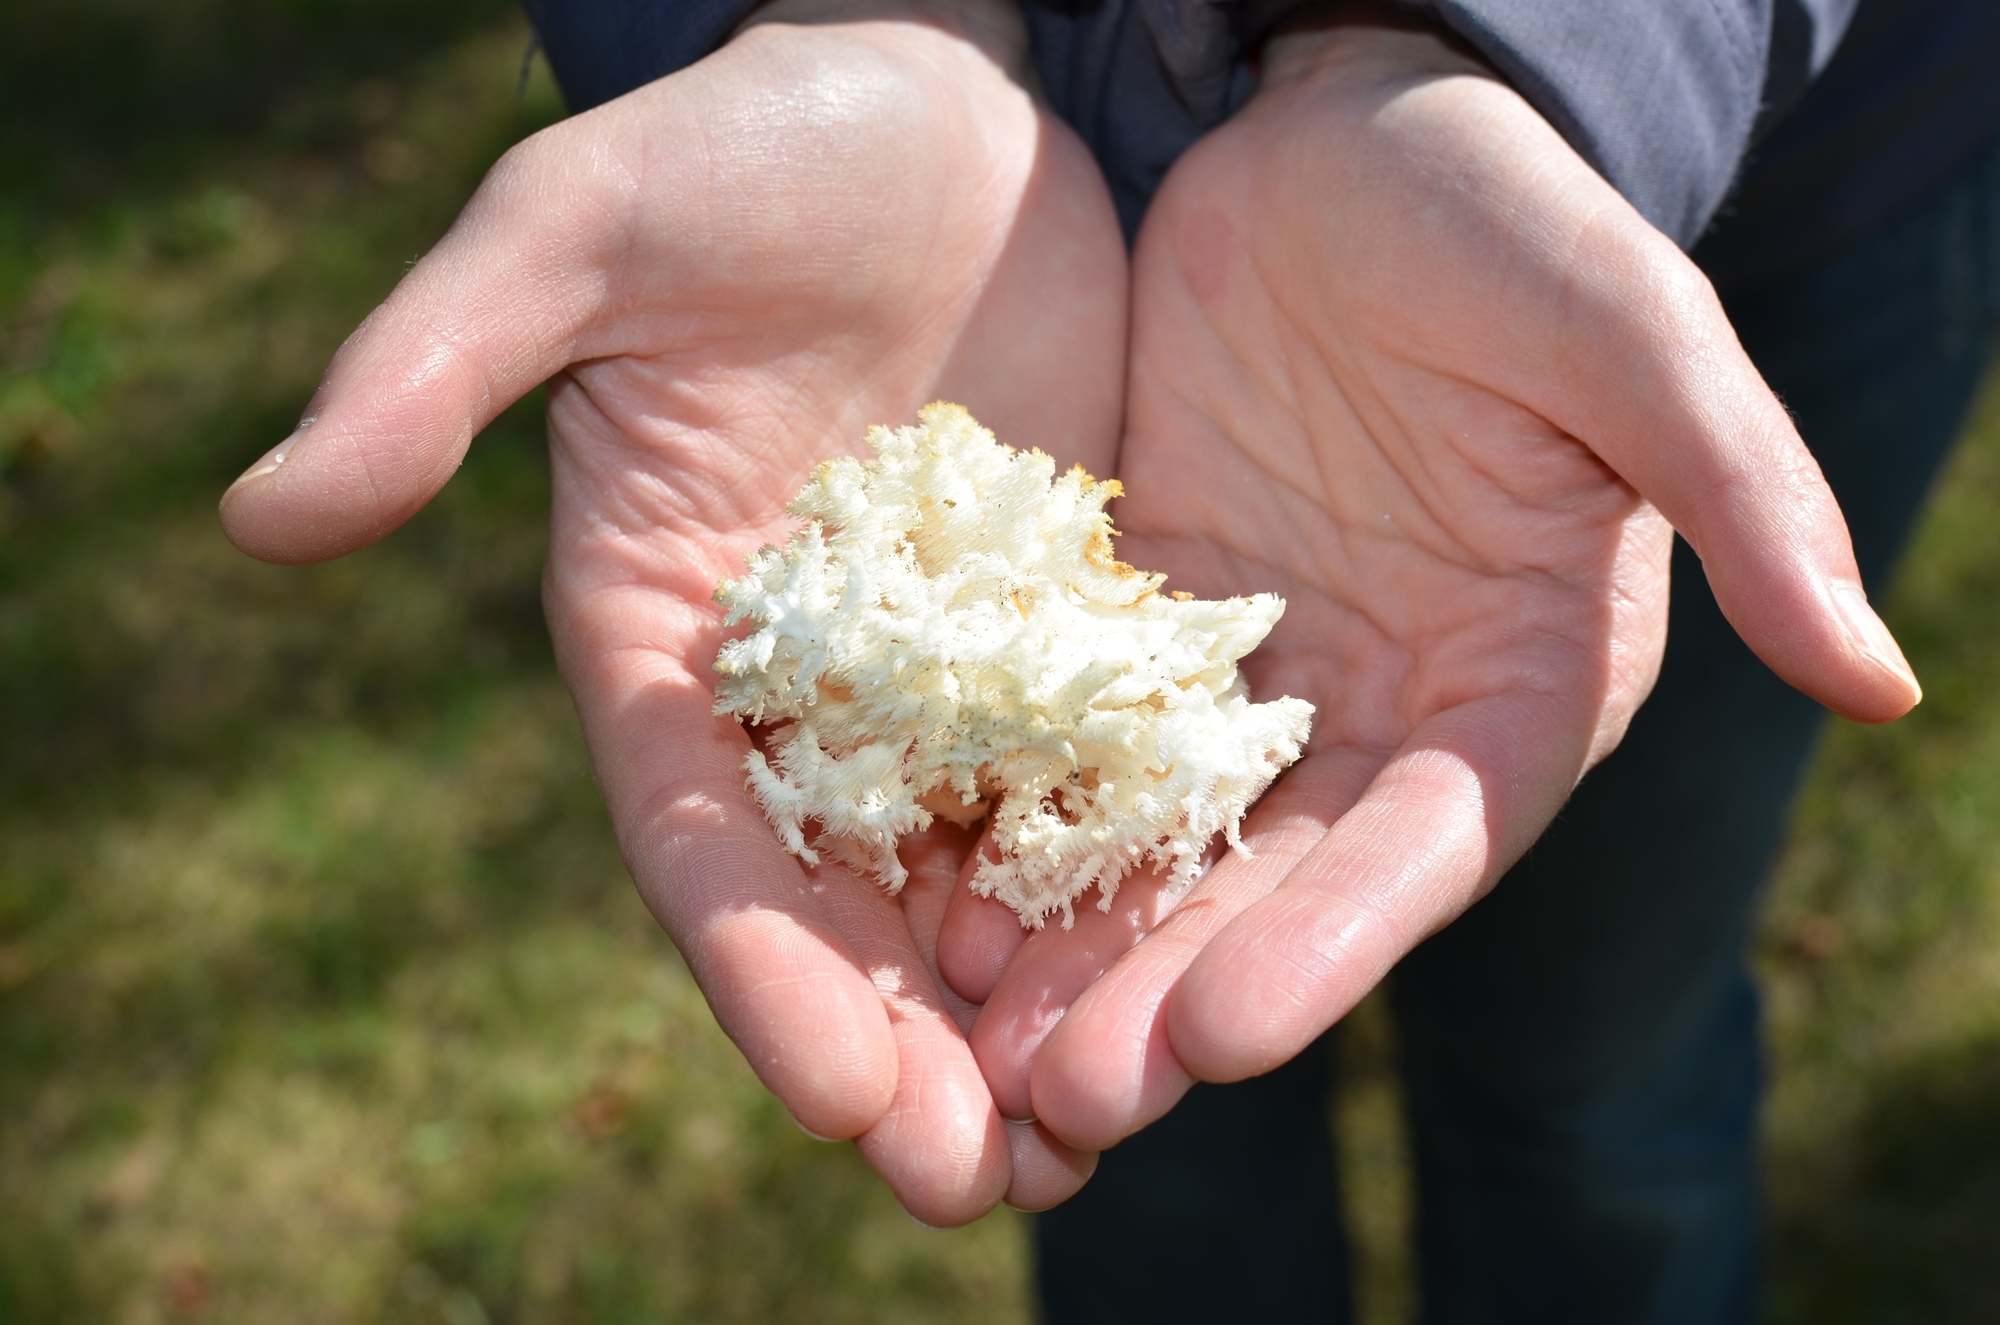 One of the species of coral fungi, likely the crested coral, was found on a forest health scavenger hunt by students during a forestry field day.